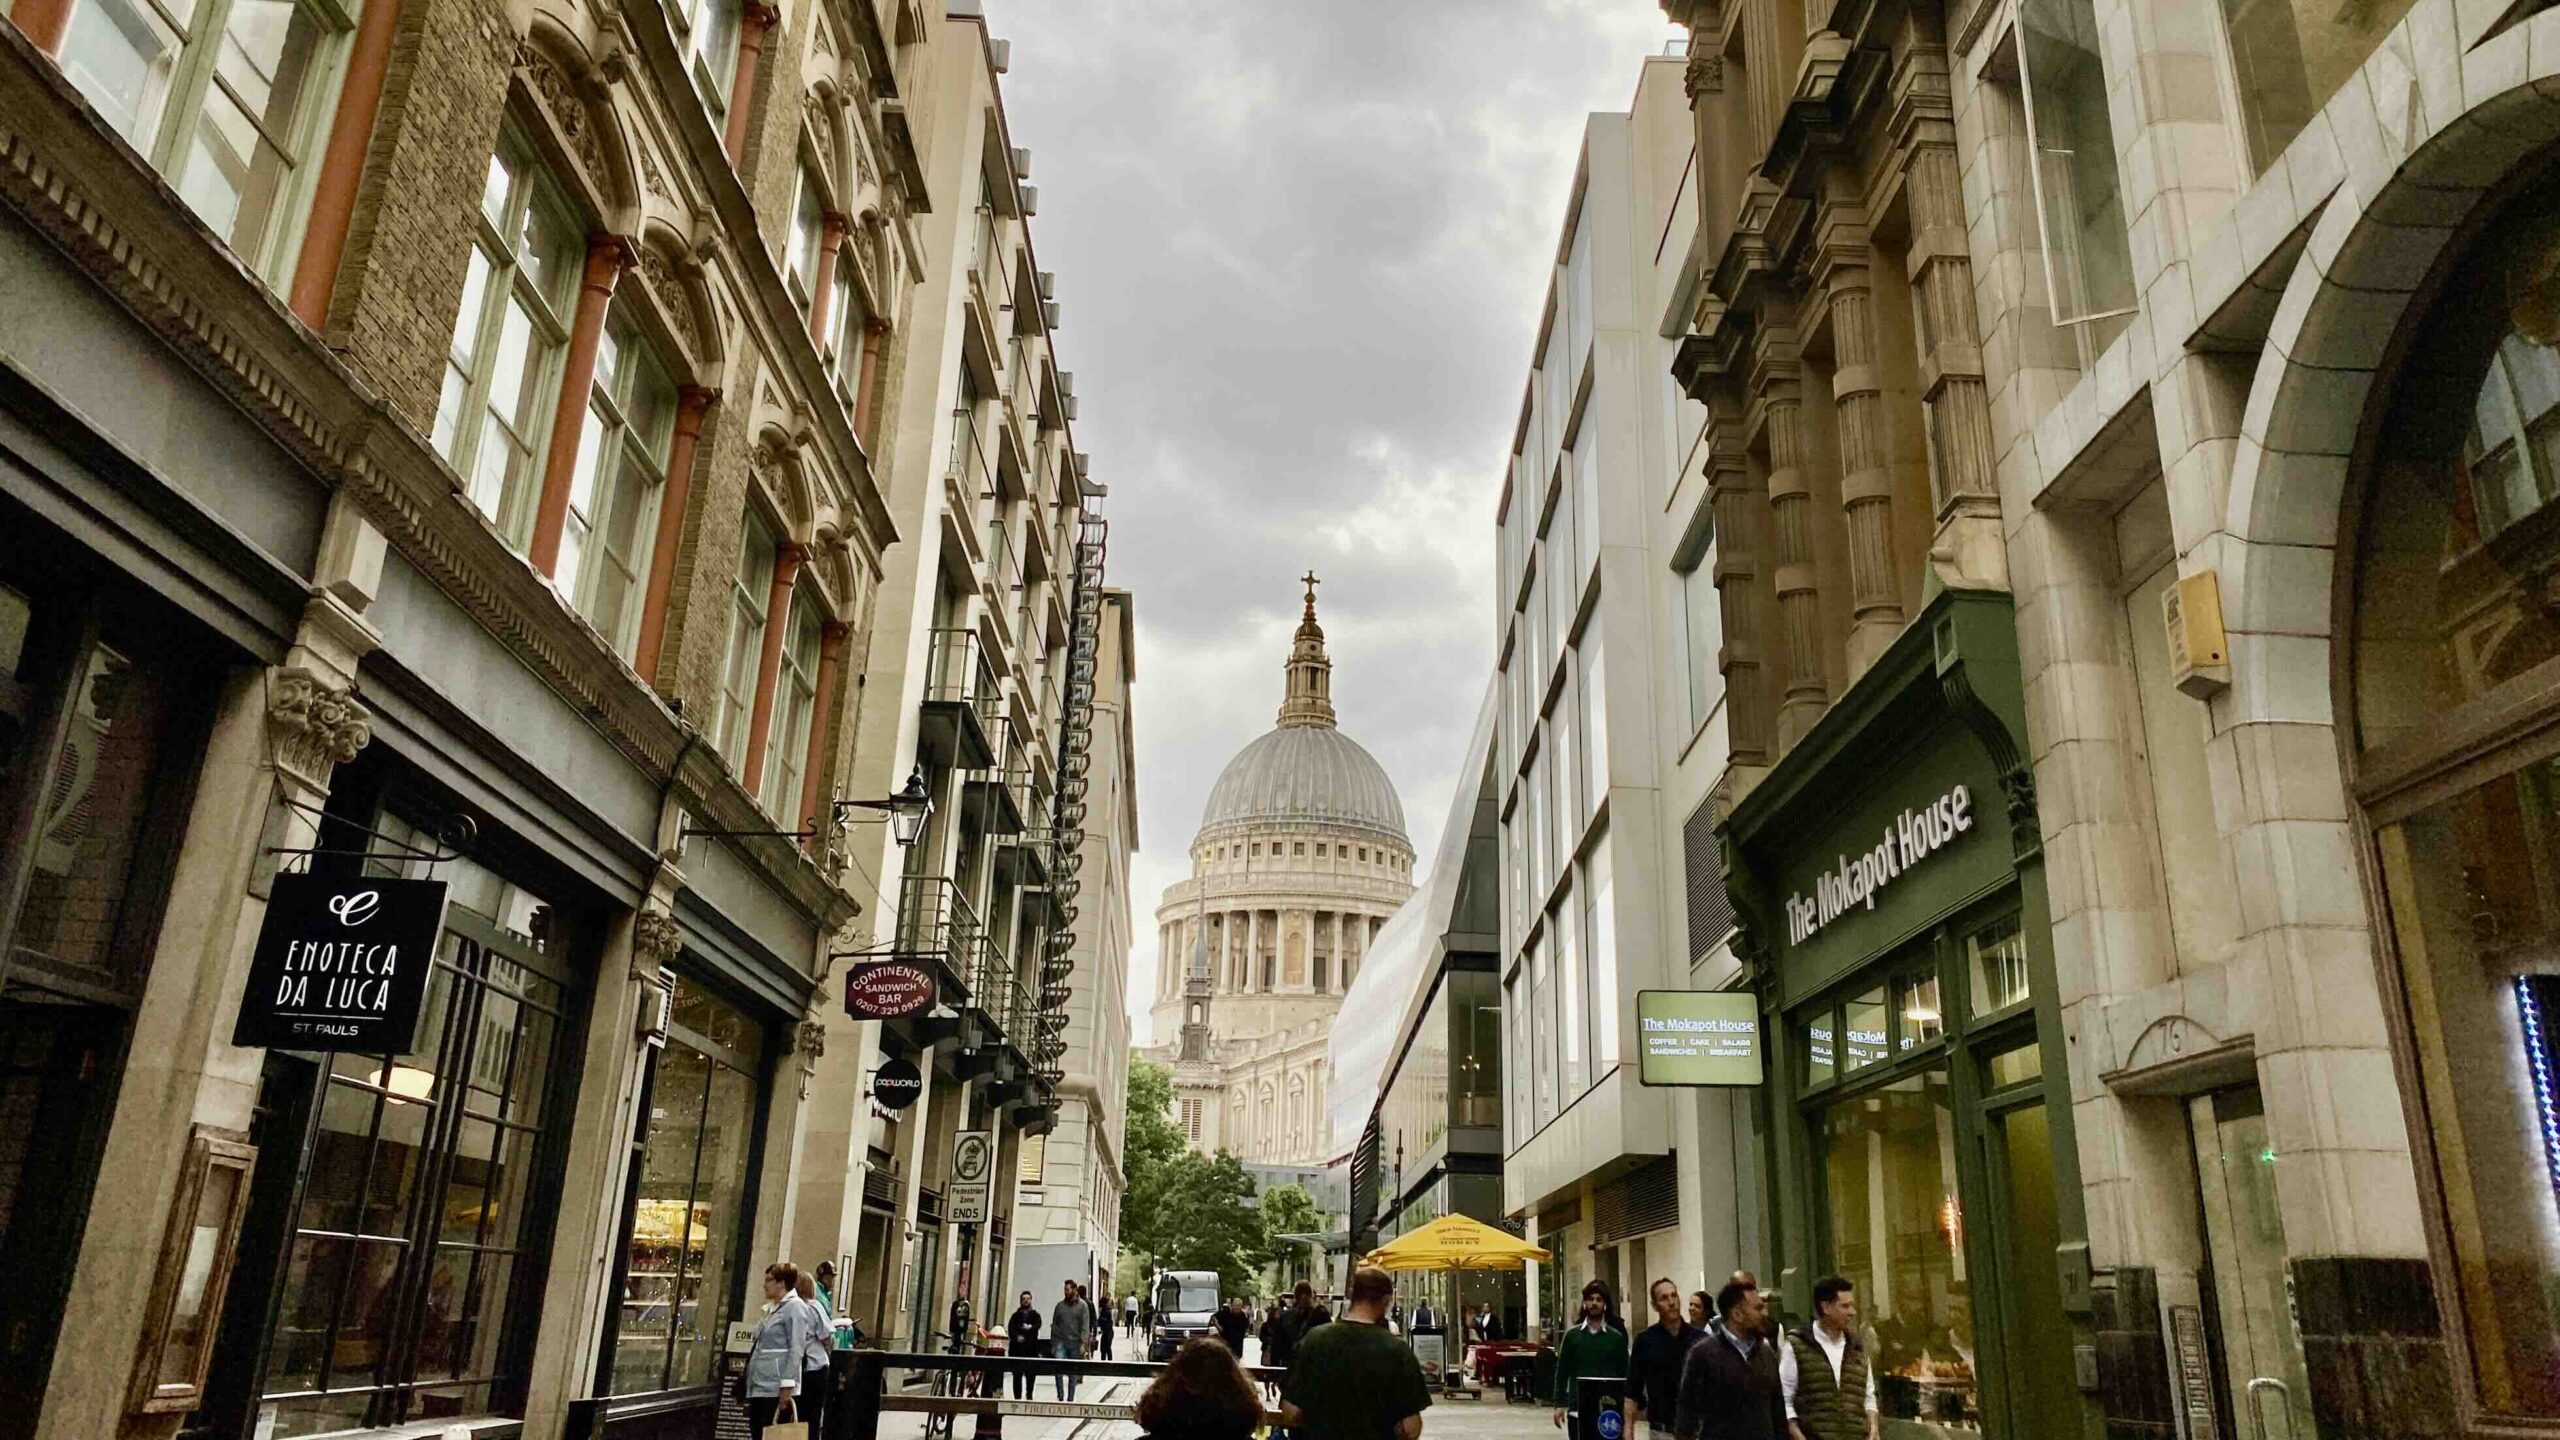 St Pauls Caethdral silhouetted by street by Bryan Dearsley